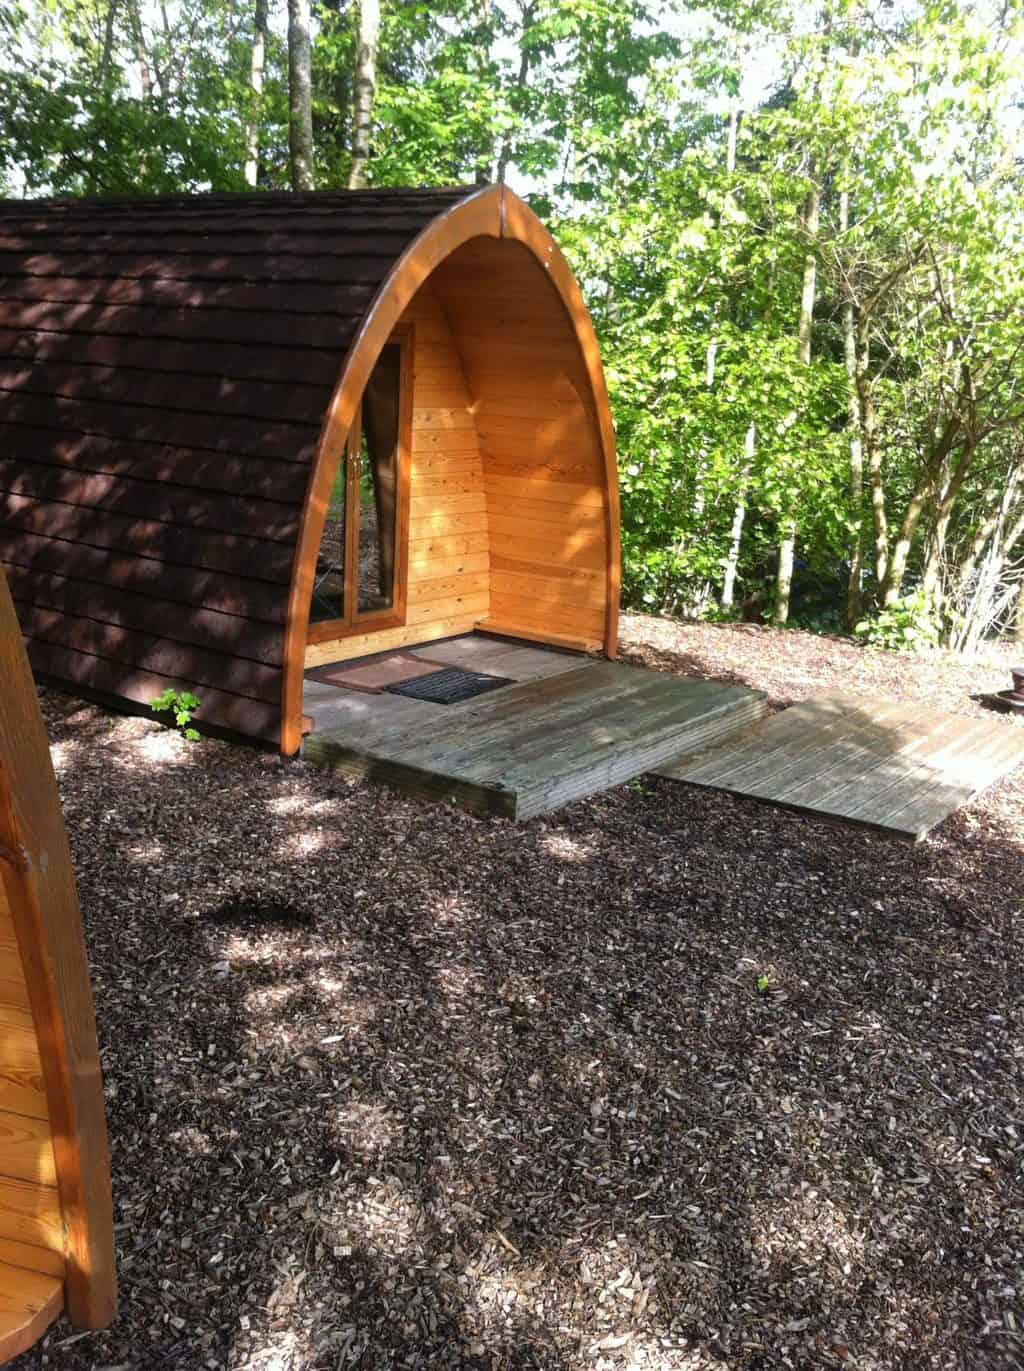 A glamping hut in the lake district. It is a curved wooden building that looks like a curved shed.